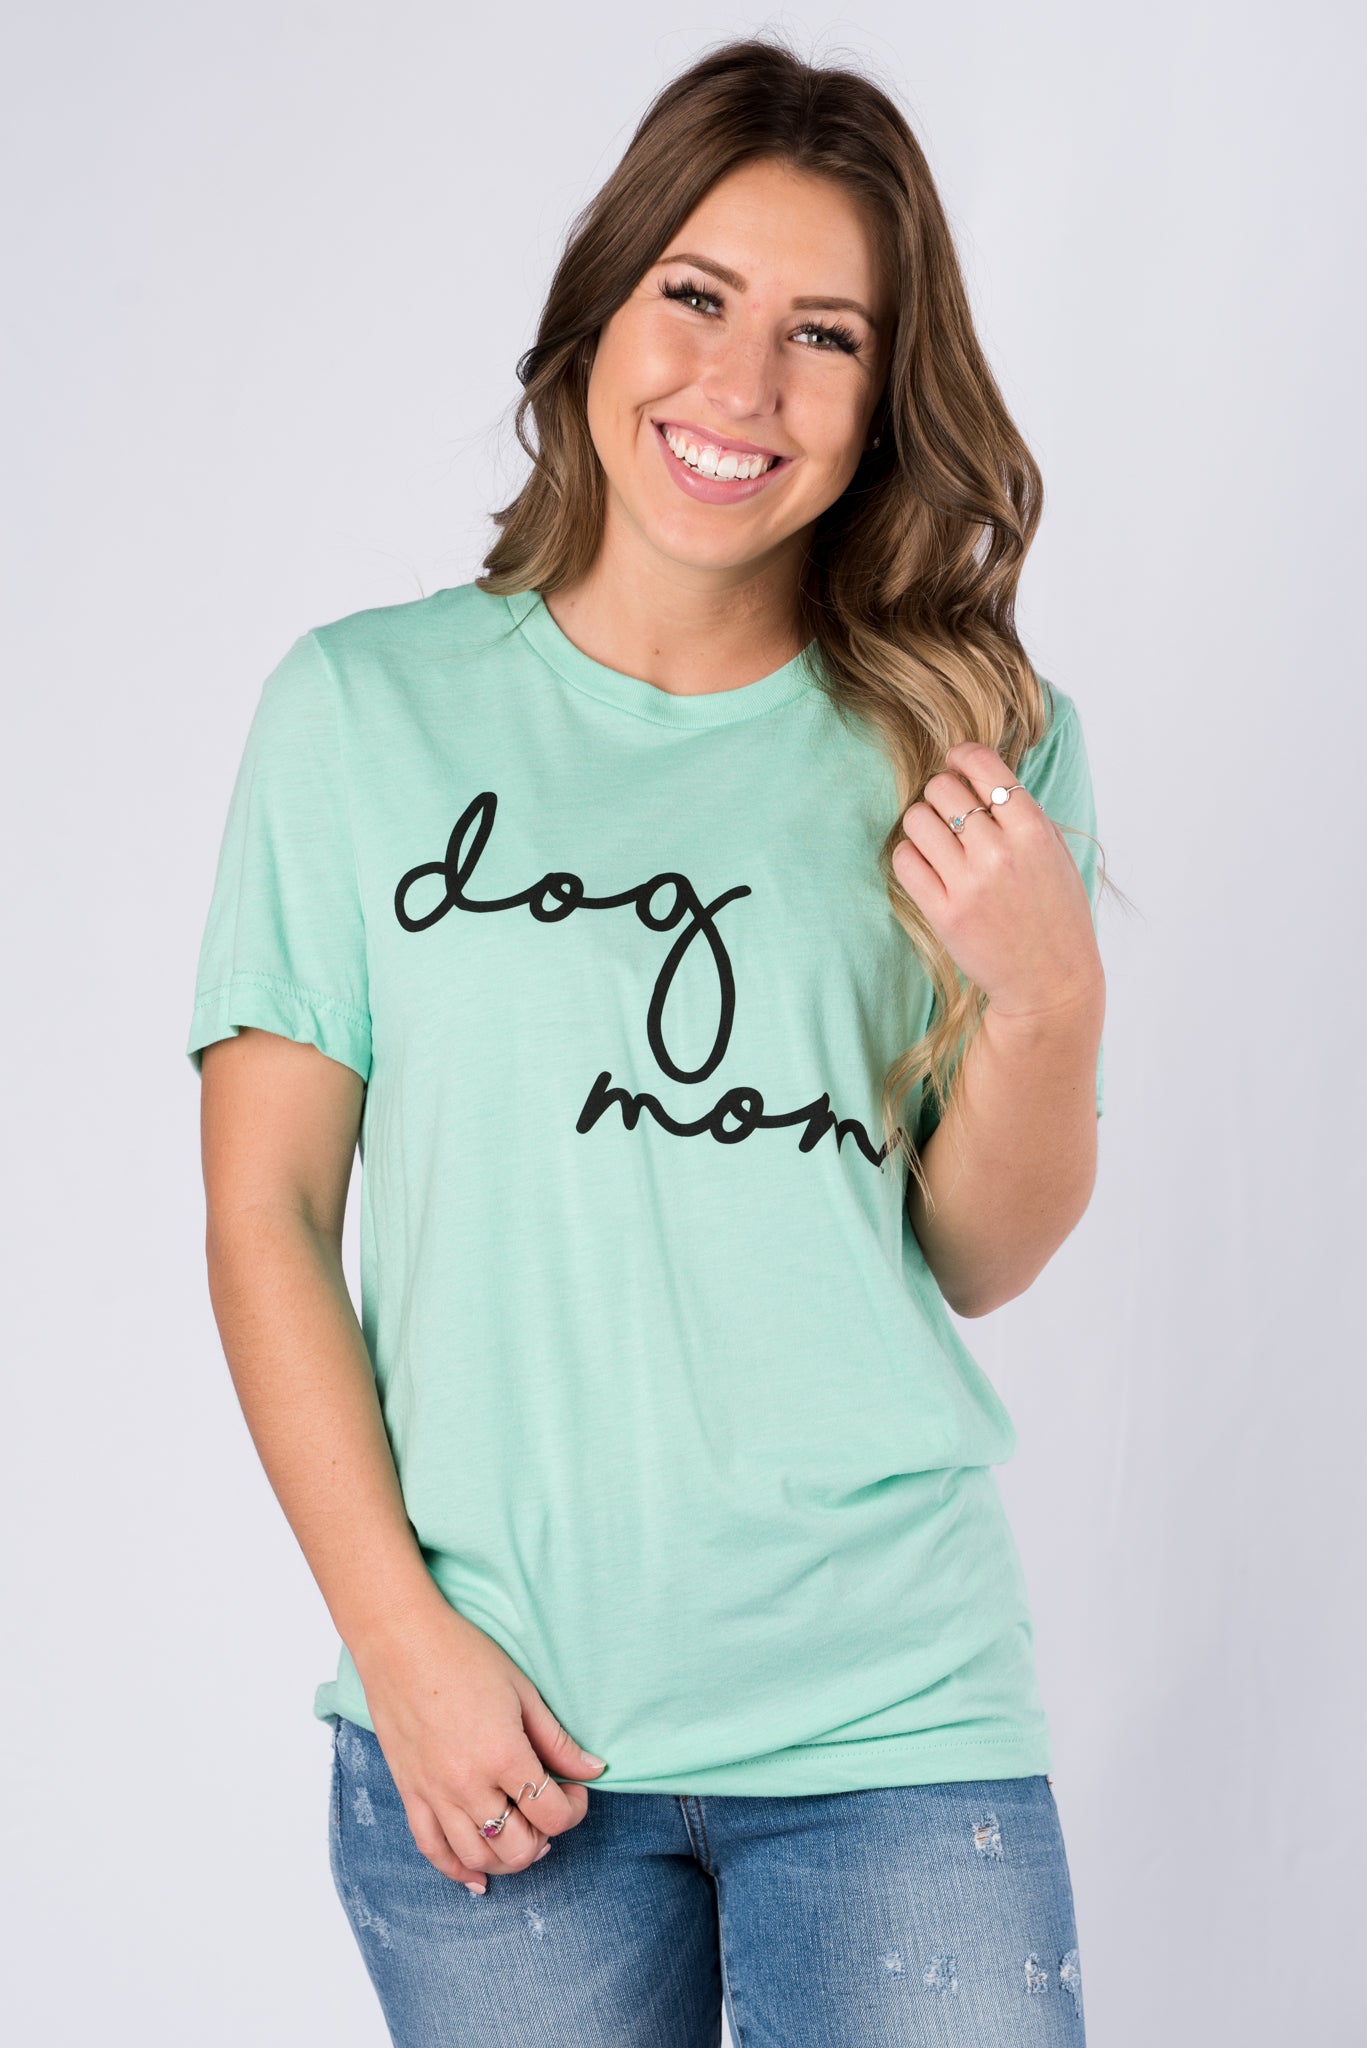 Dog mom large pride script short sleeve crew neck t-shirt mint - Adorable T-shirts - Unique Tank Tops and Graphic Tees at Lush Fashion Lounge Boutique in Oklahoma